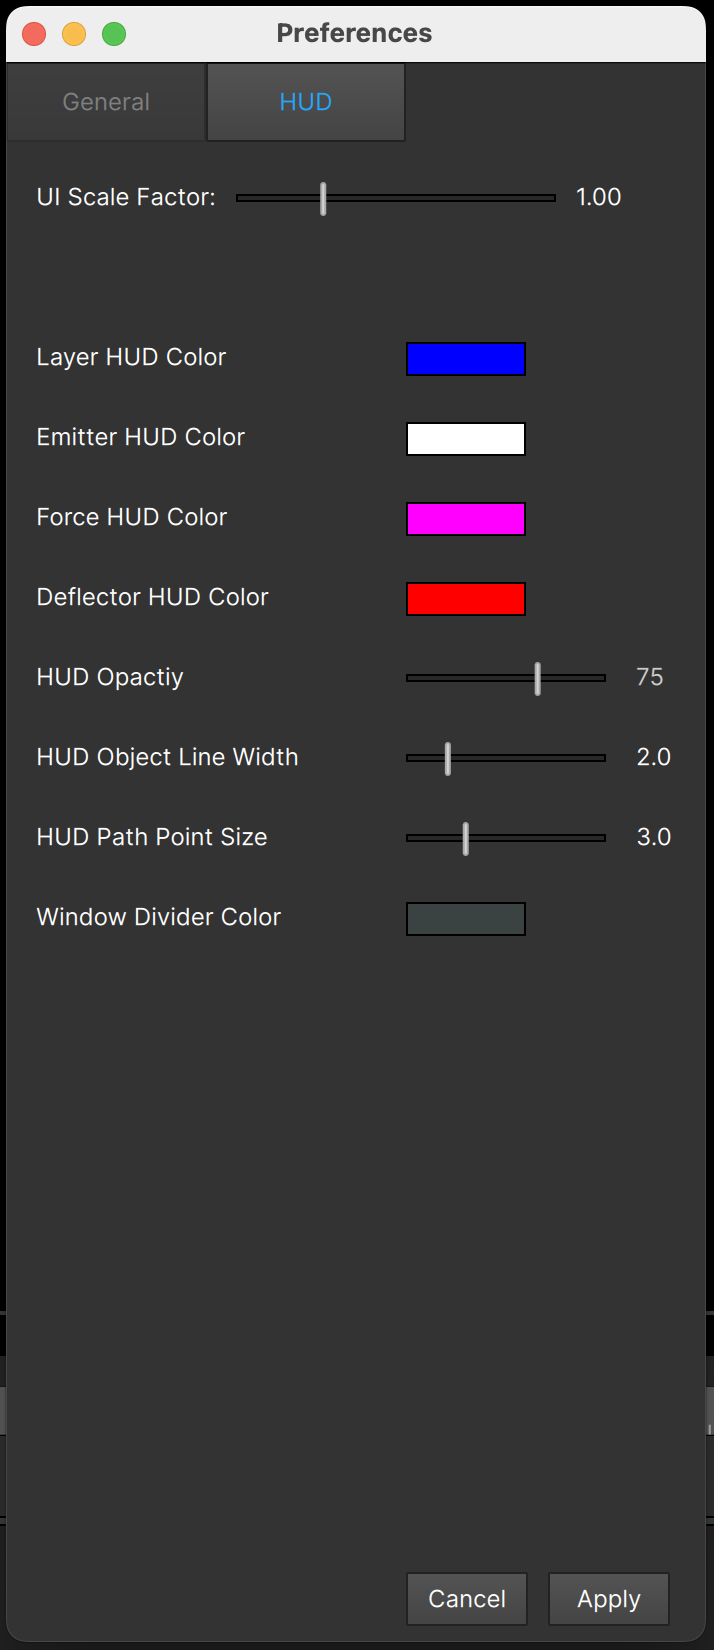 Heads Up Display Preferences